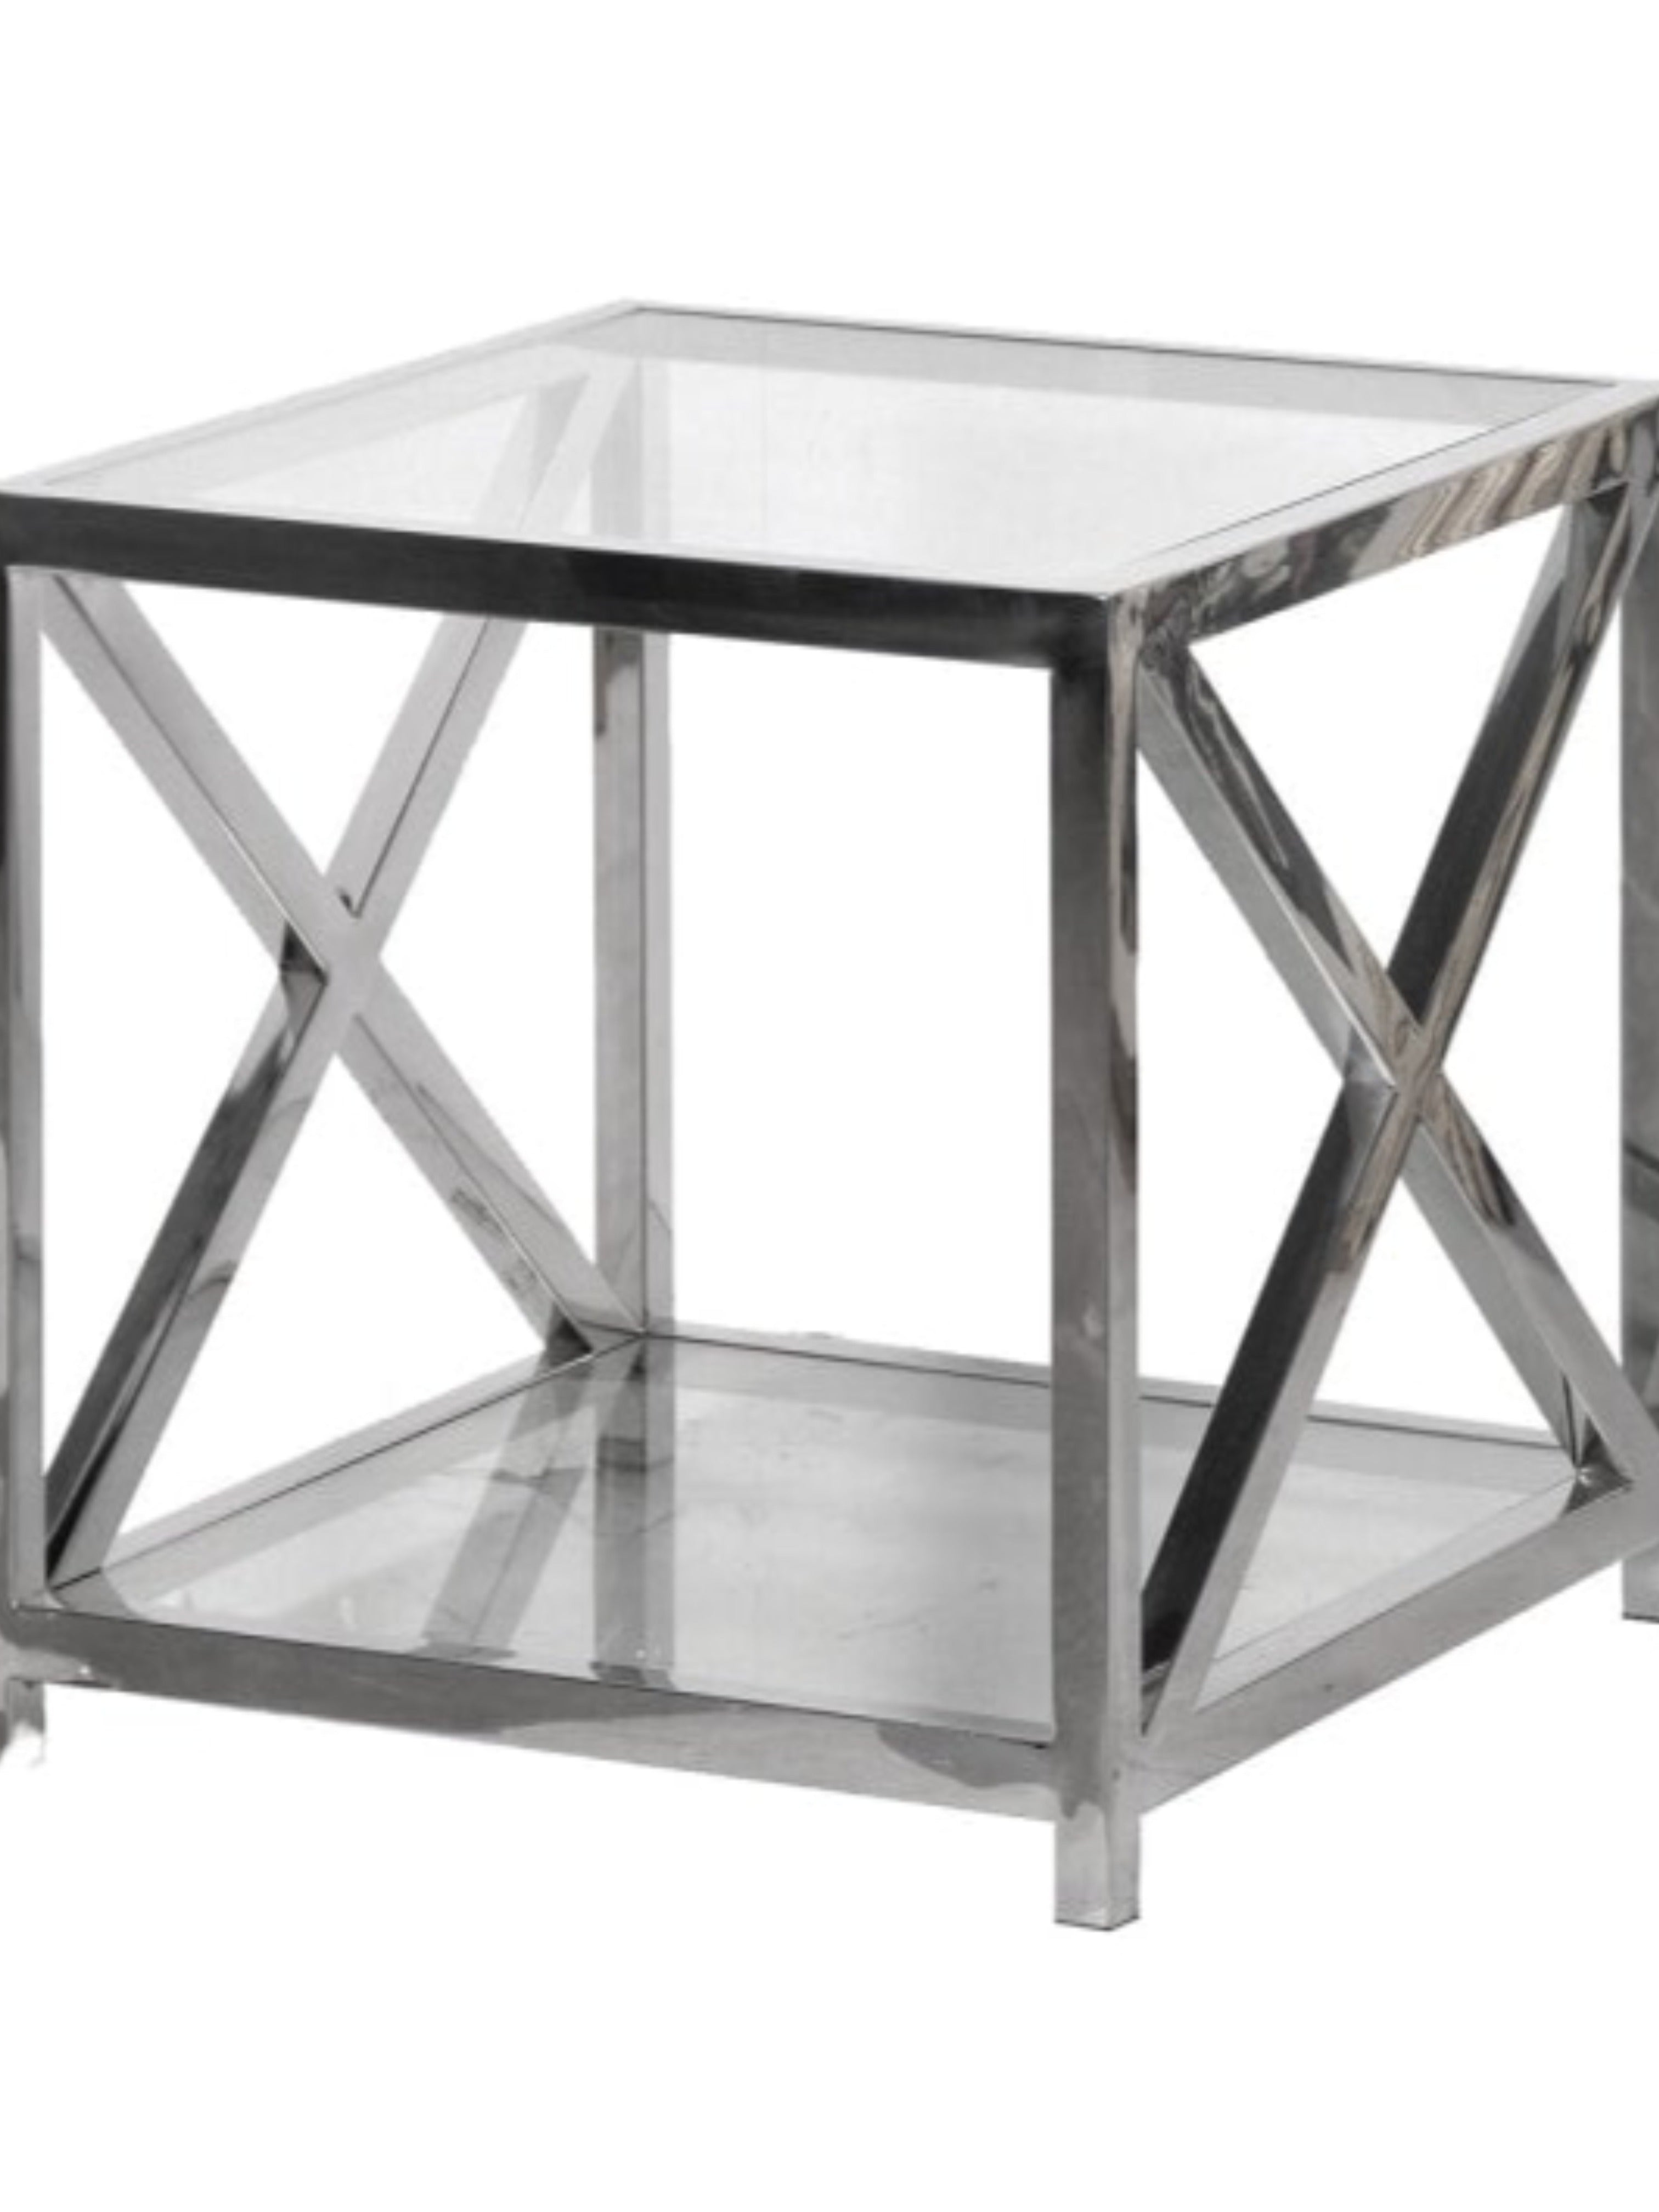 Two Tiered Glass and Steel Side Table